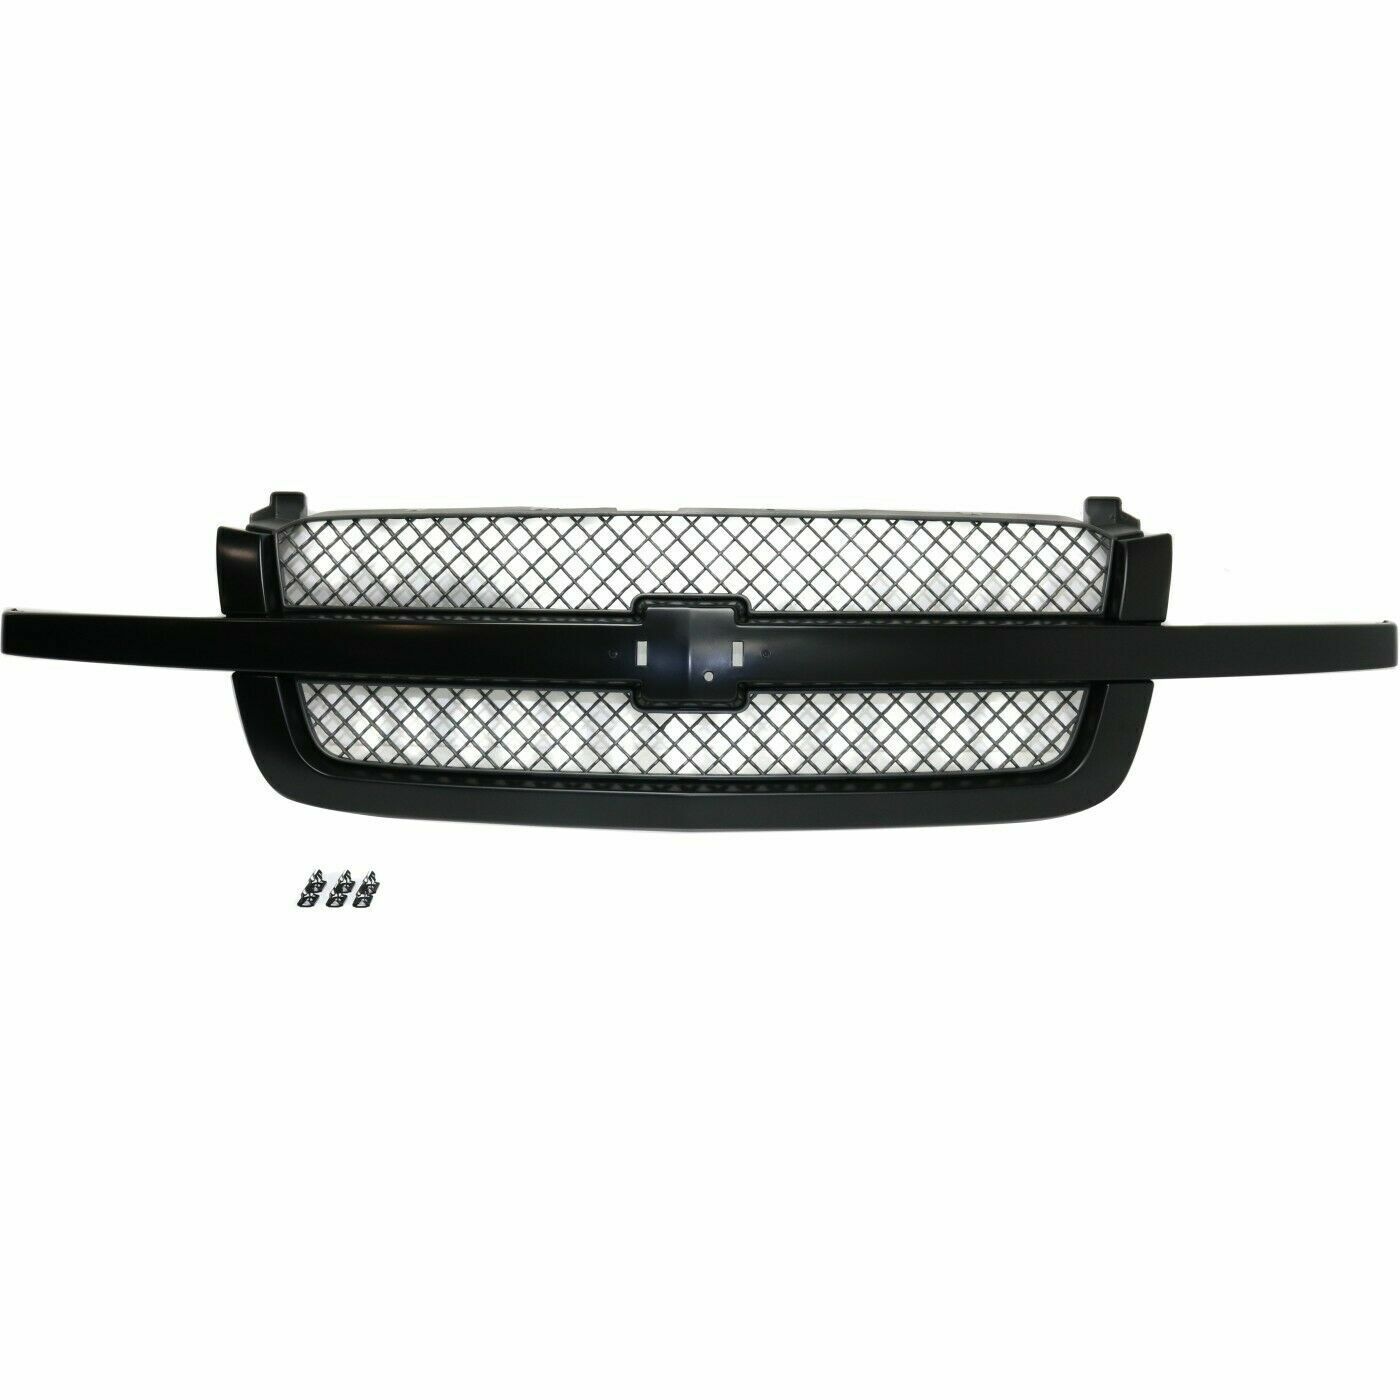 NEW Paintable Grille Assy For 2003-2005 Silverado 1500 2500 3500 SHIPS TODAY